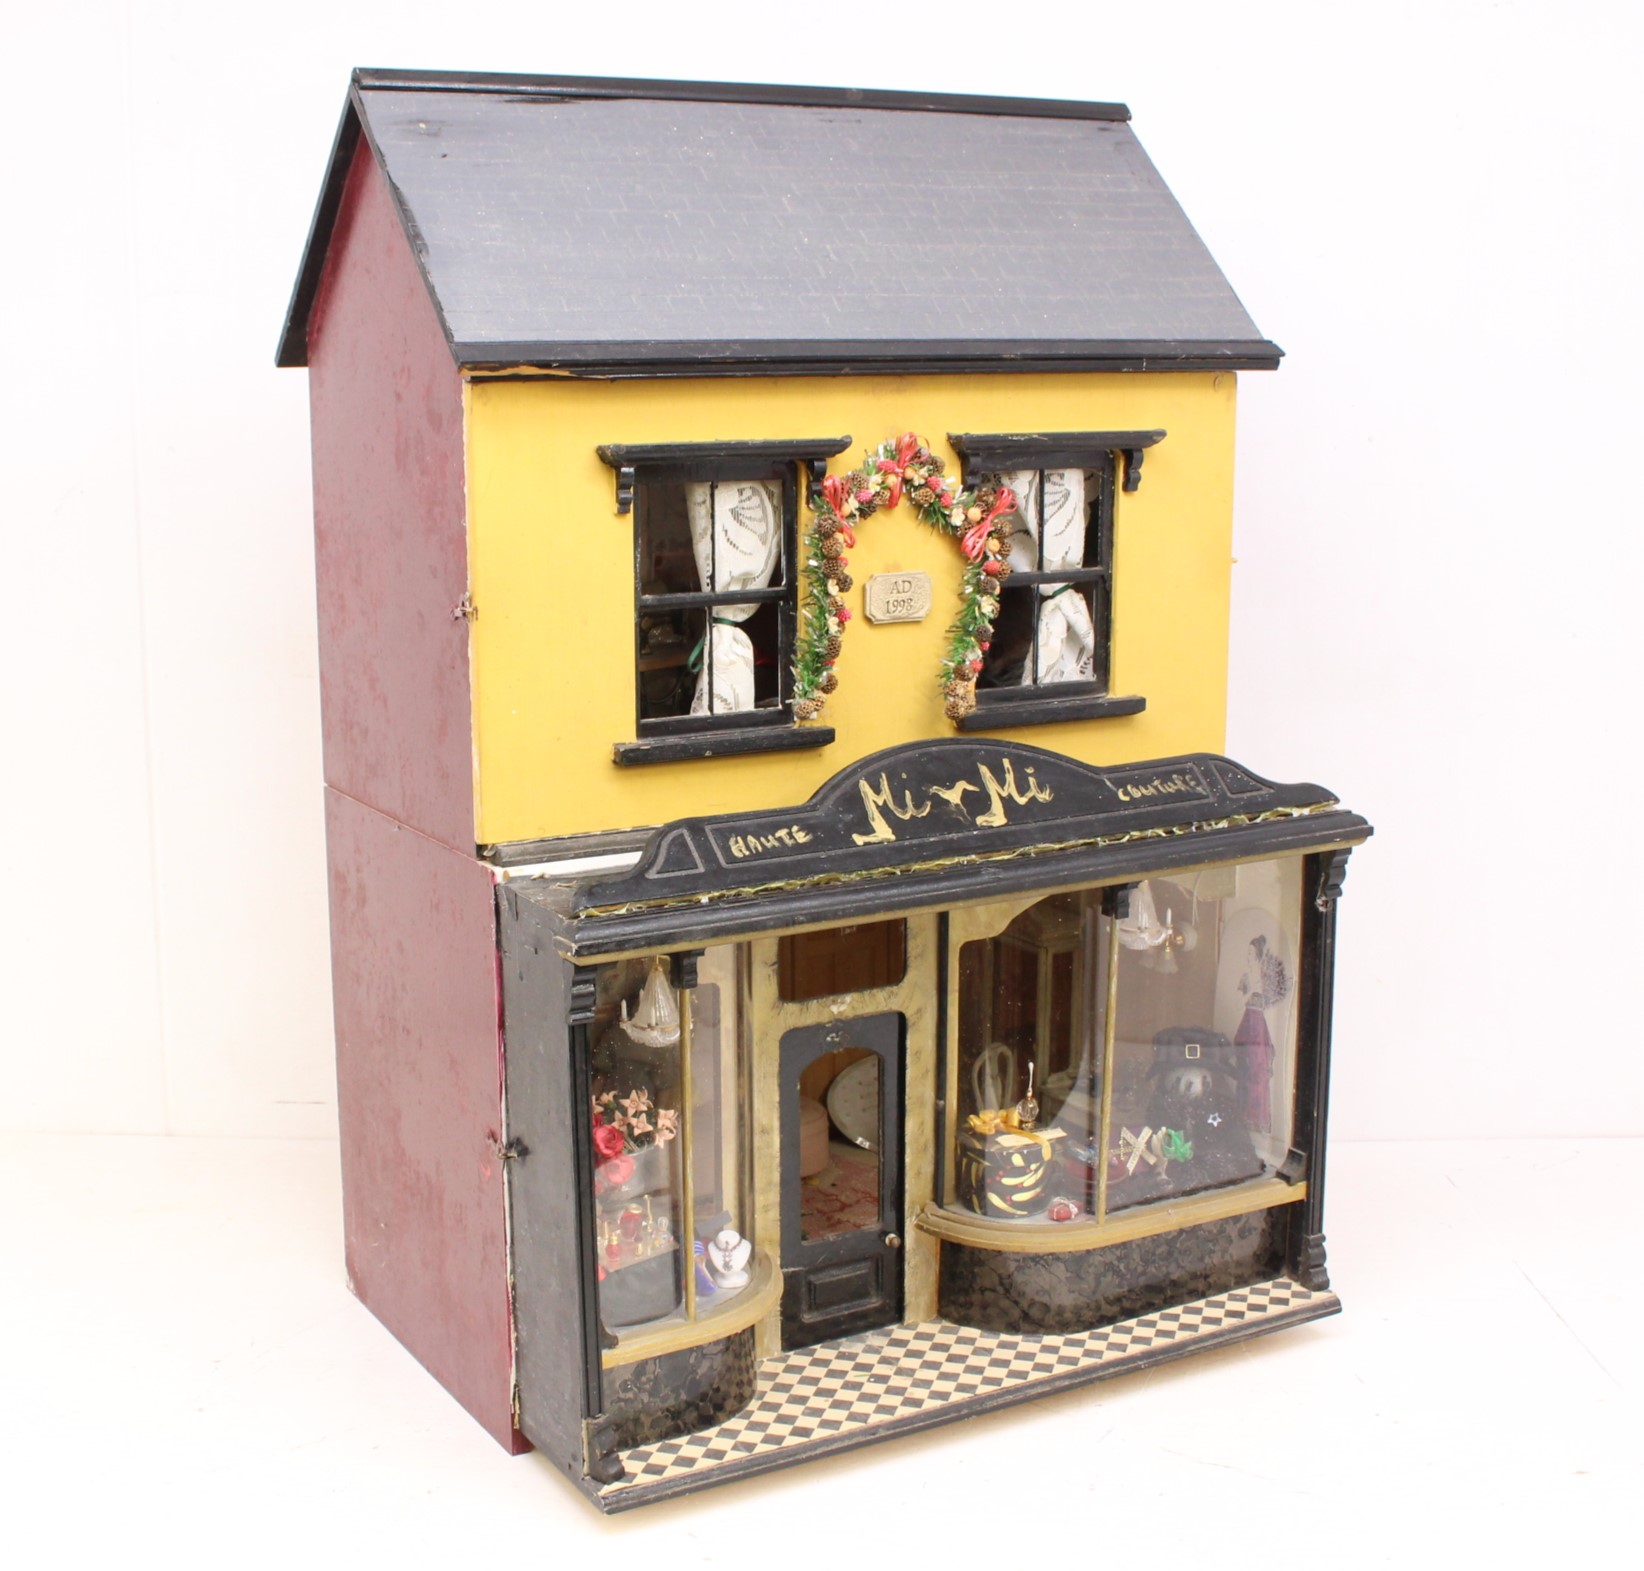 Dolls House: A mid-20th century kit-built two-storey dolls house, the lower floor comprising a